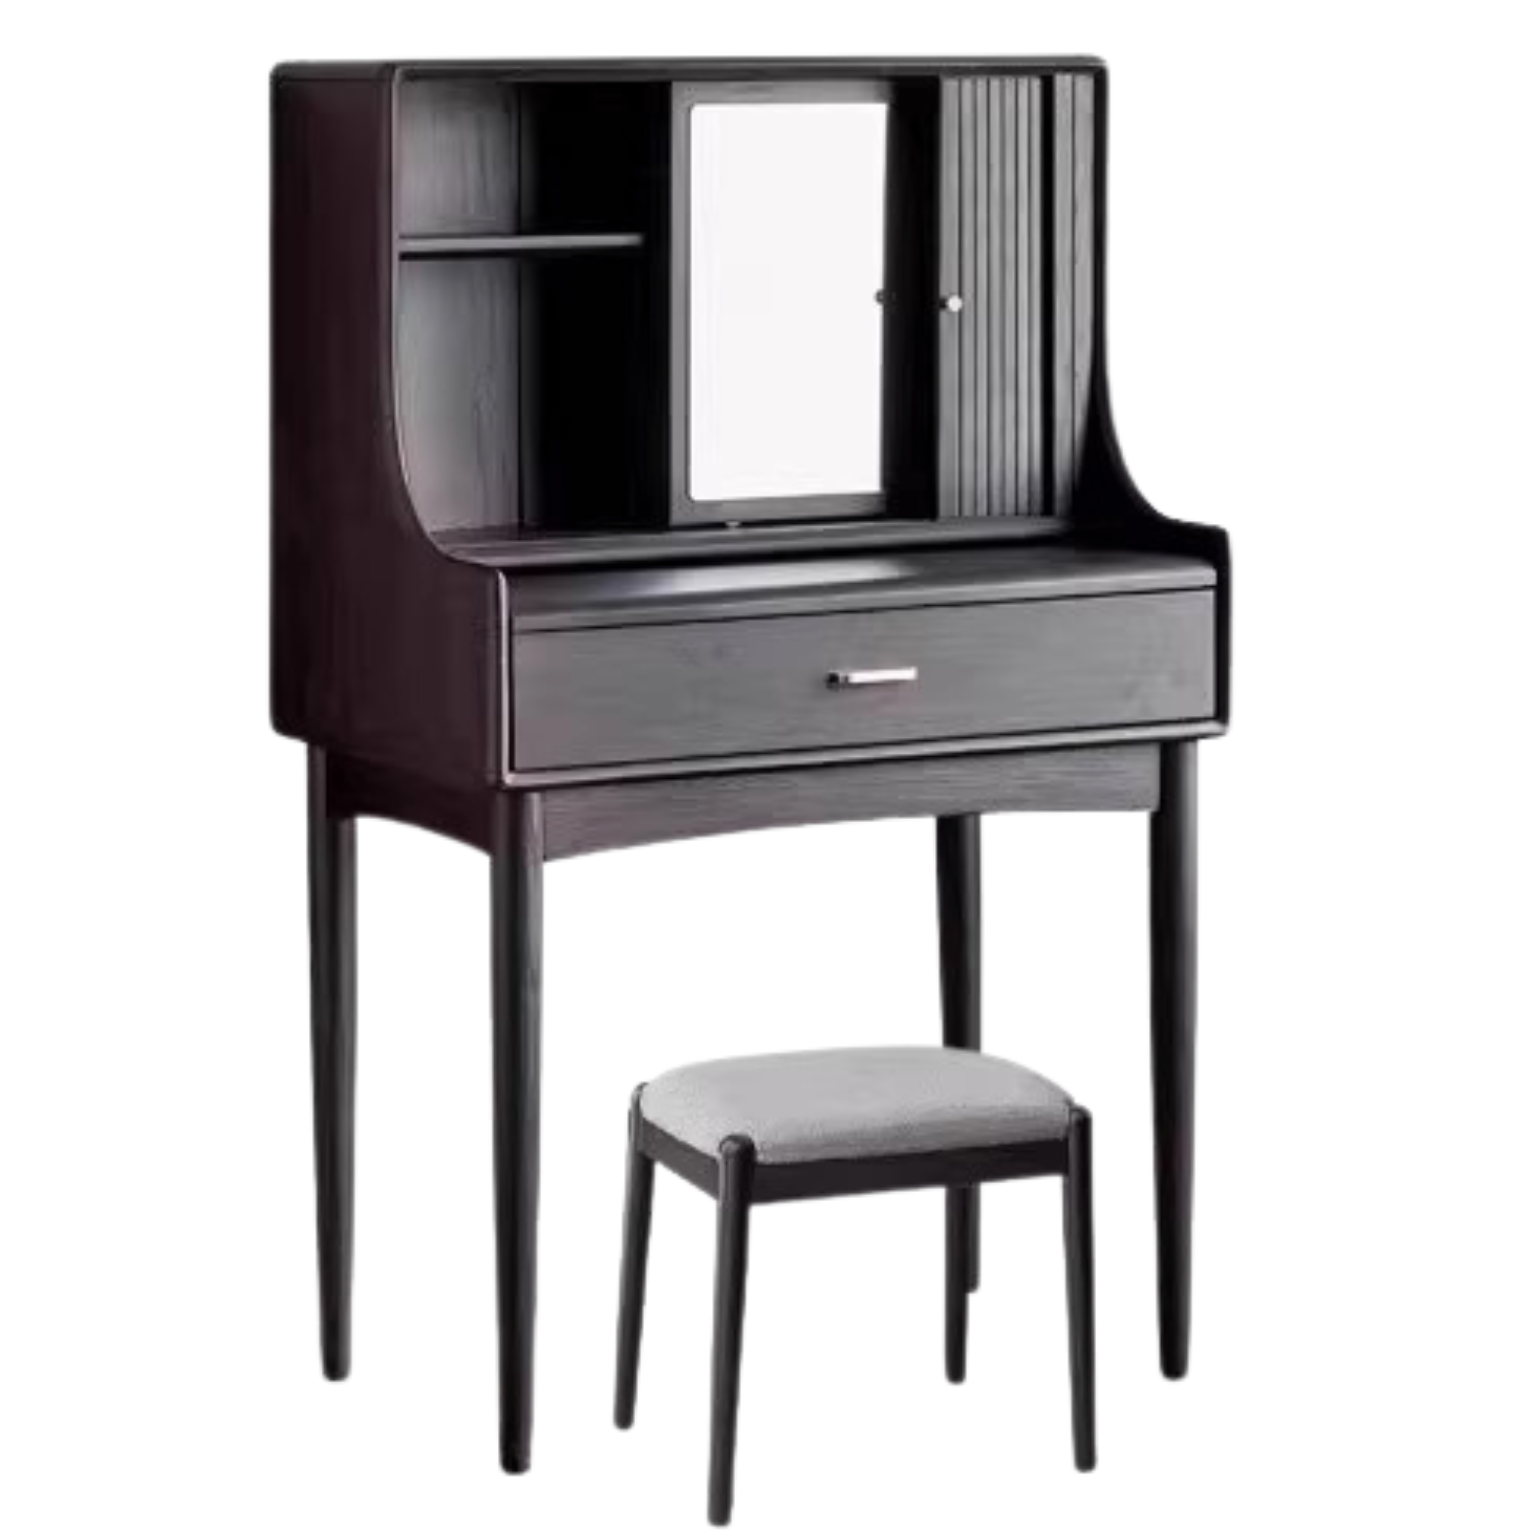 Oak solid wood dressing table Smoked color: